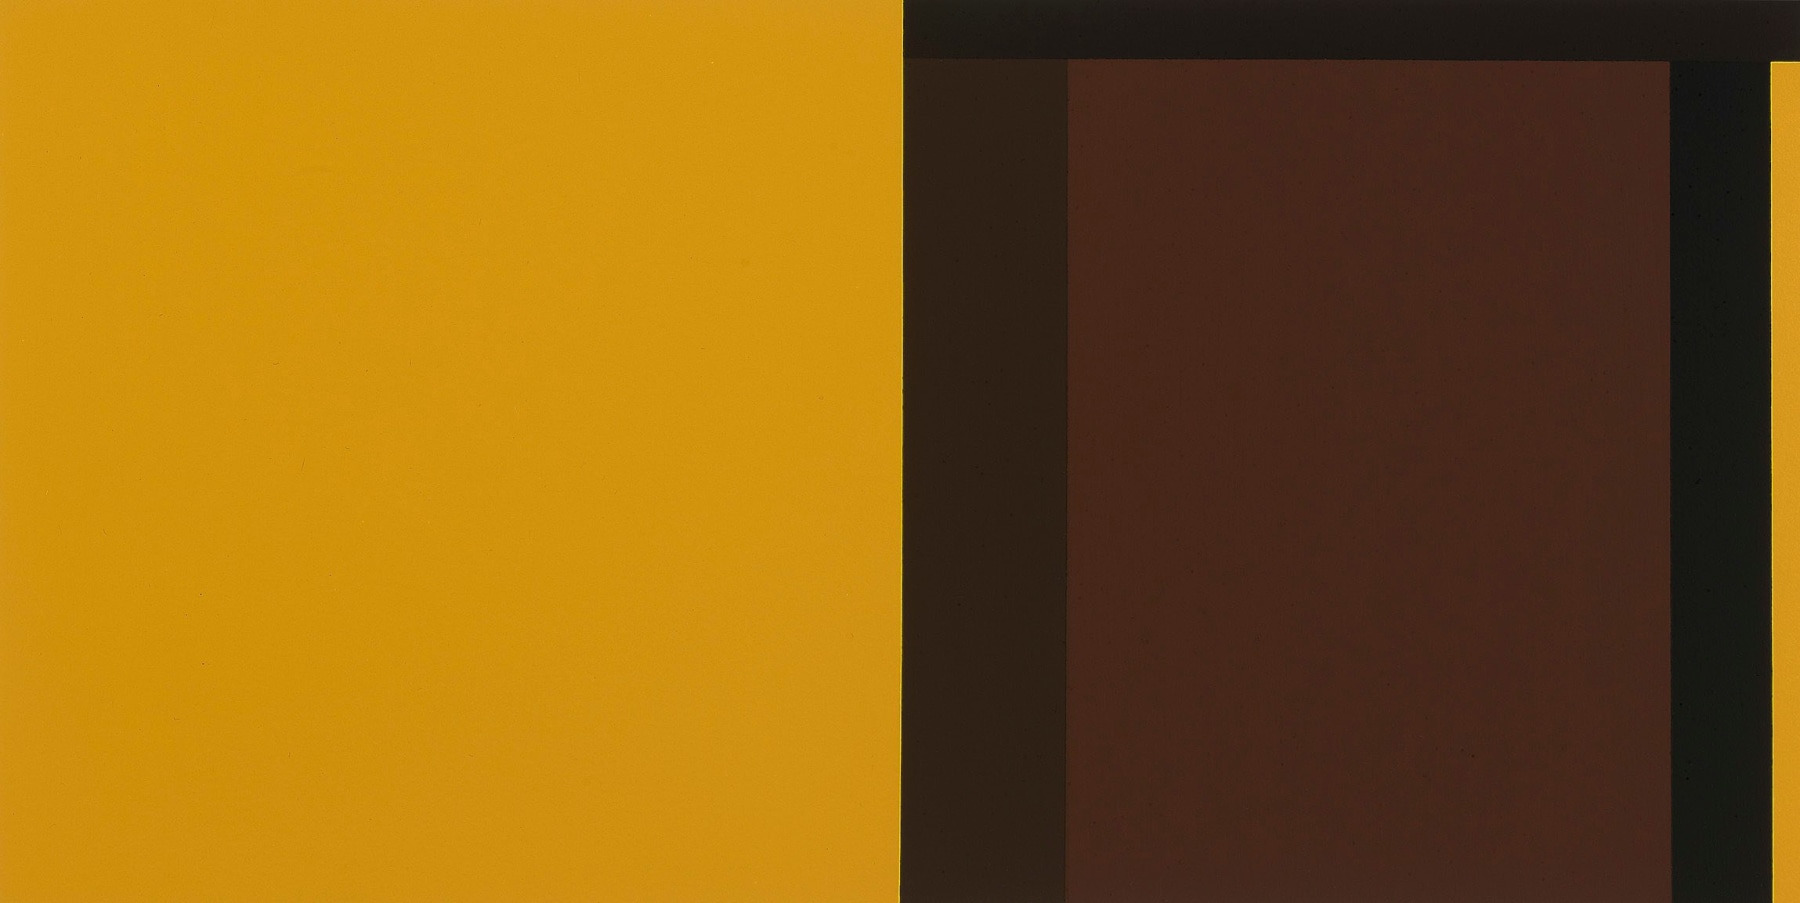 Cuvier Study, 2002

acrylic on paper

12 &amp;frac12; x 18 inches; 31.8 x 45.7 centimeters

LSFA# 11703